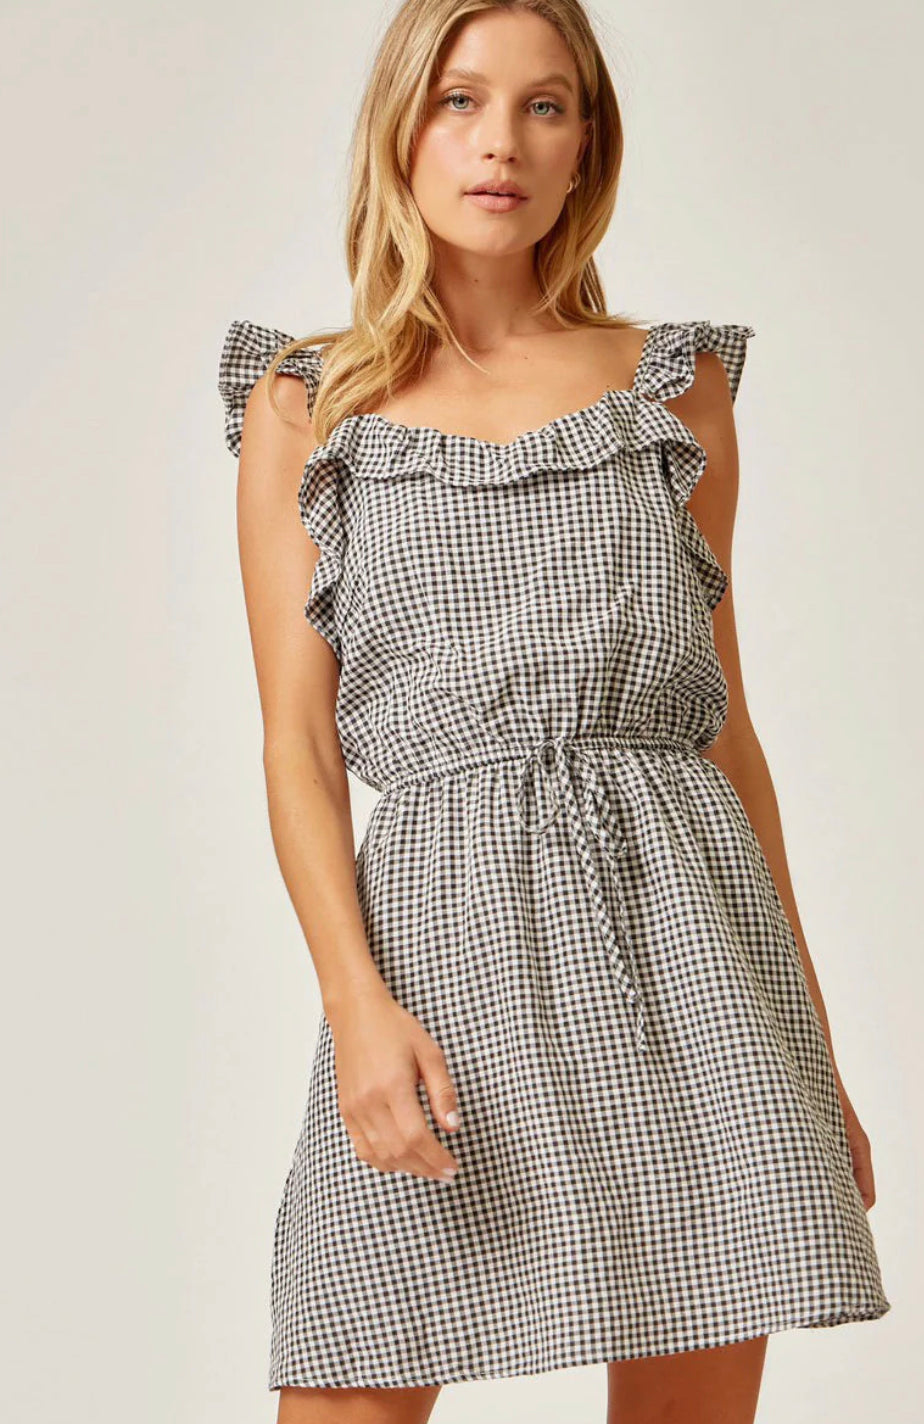 Picnic in the Park Gingham Dress